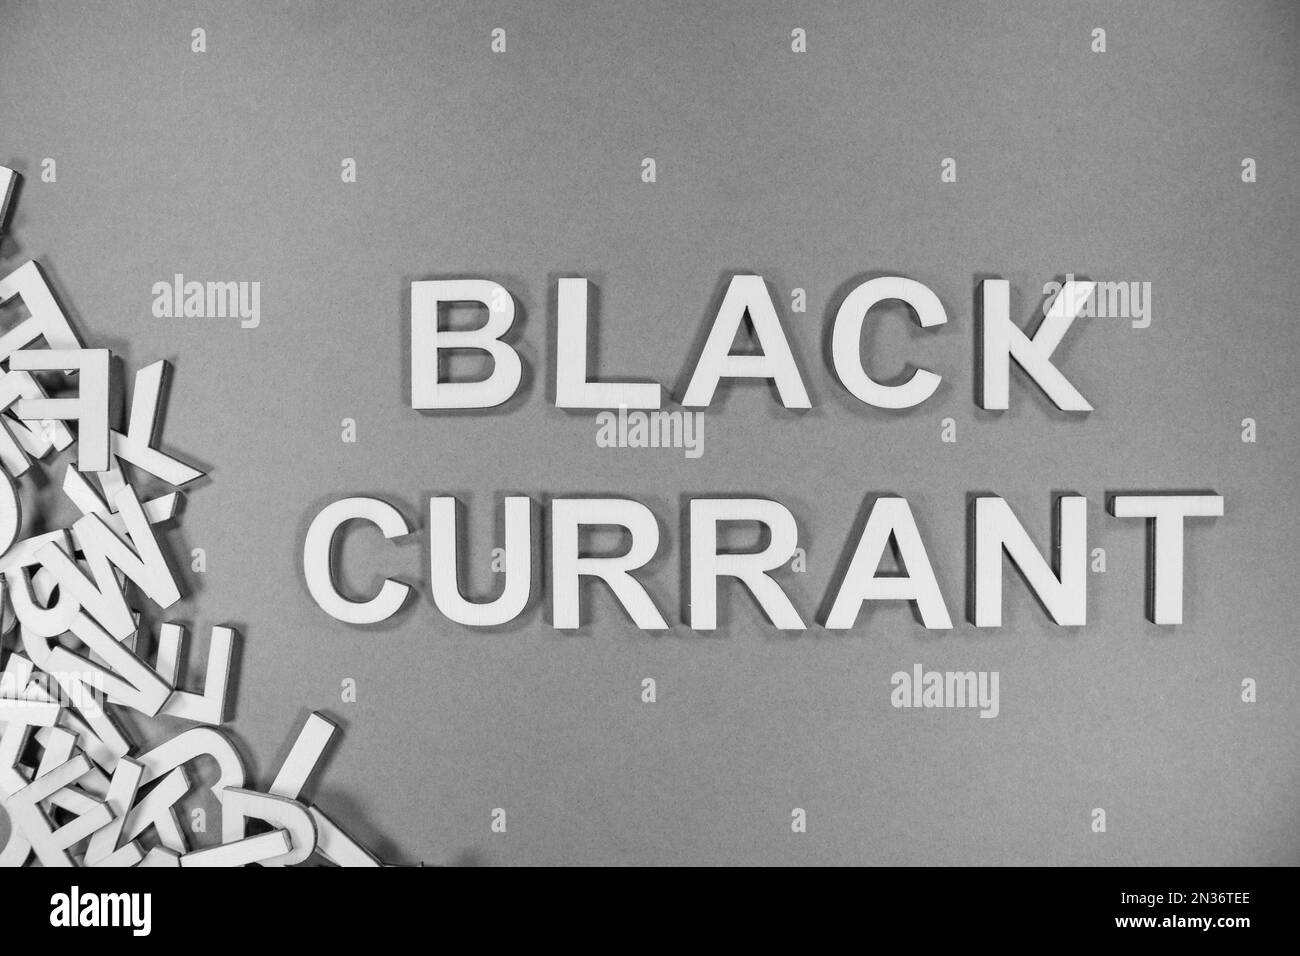 BLACK CURRANT fruit in wooden English language capital letters spilling from a pile of letters in black and white Stock Photo